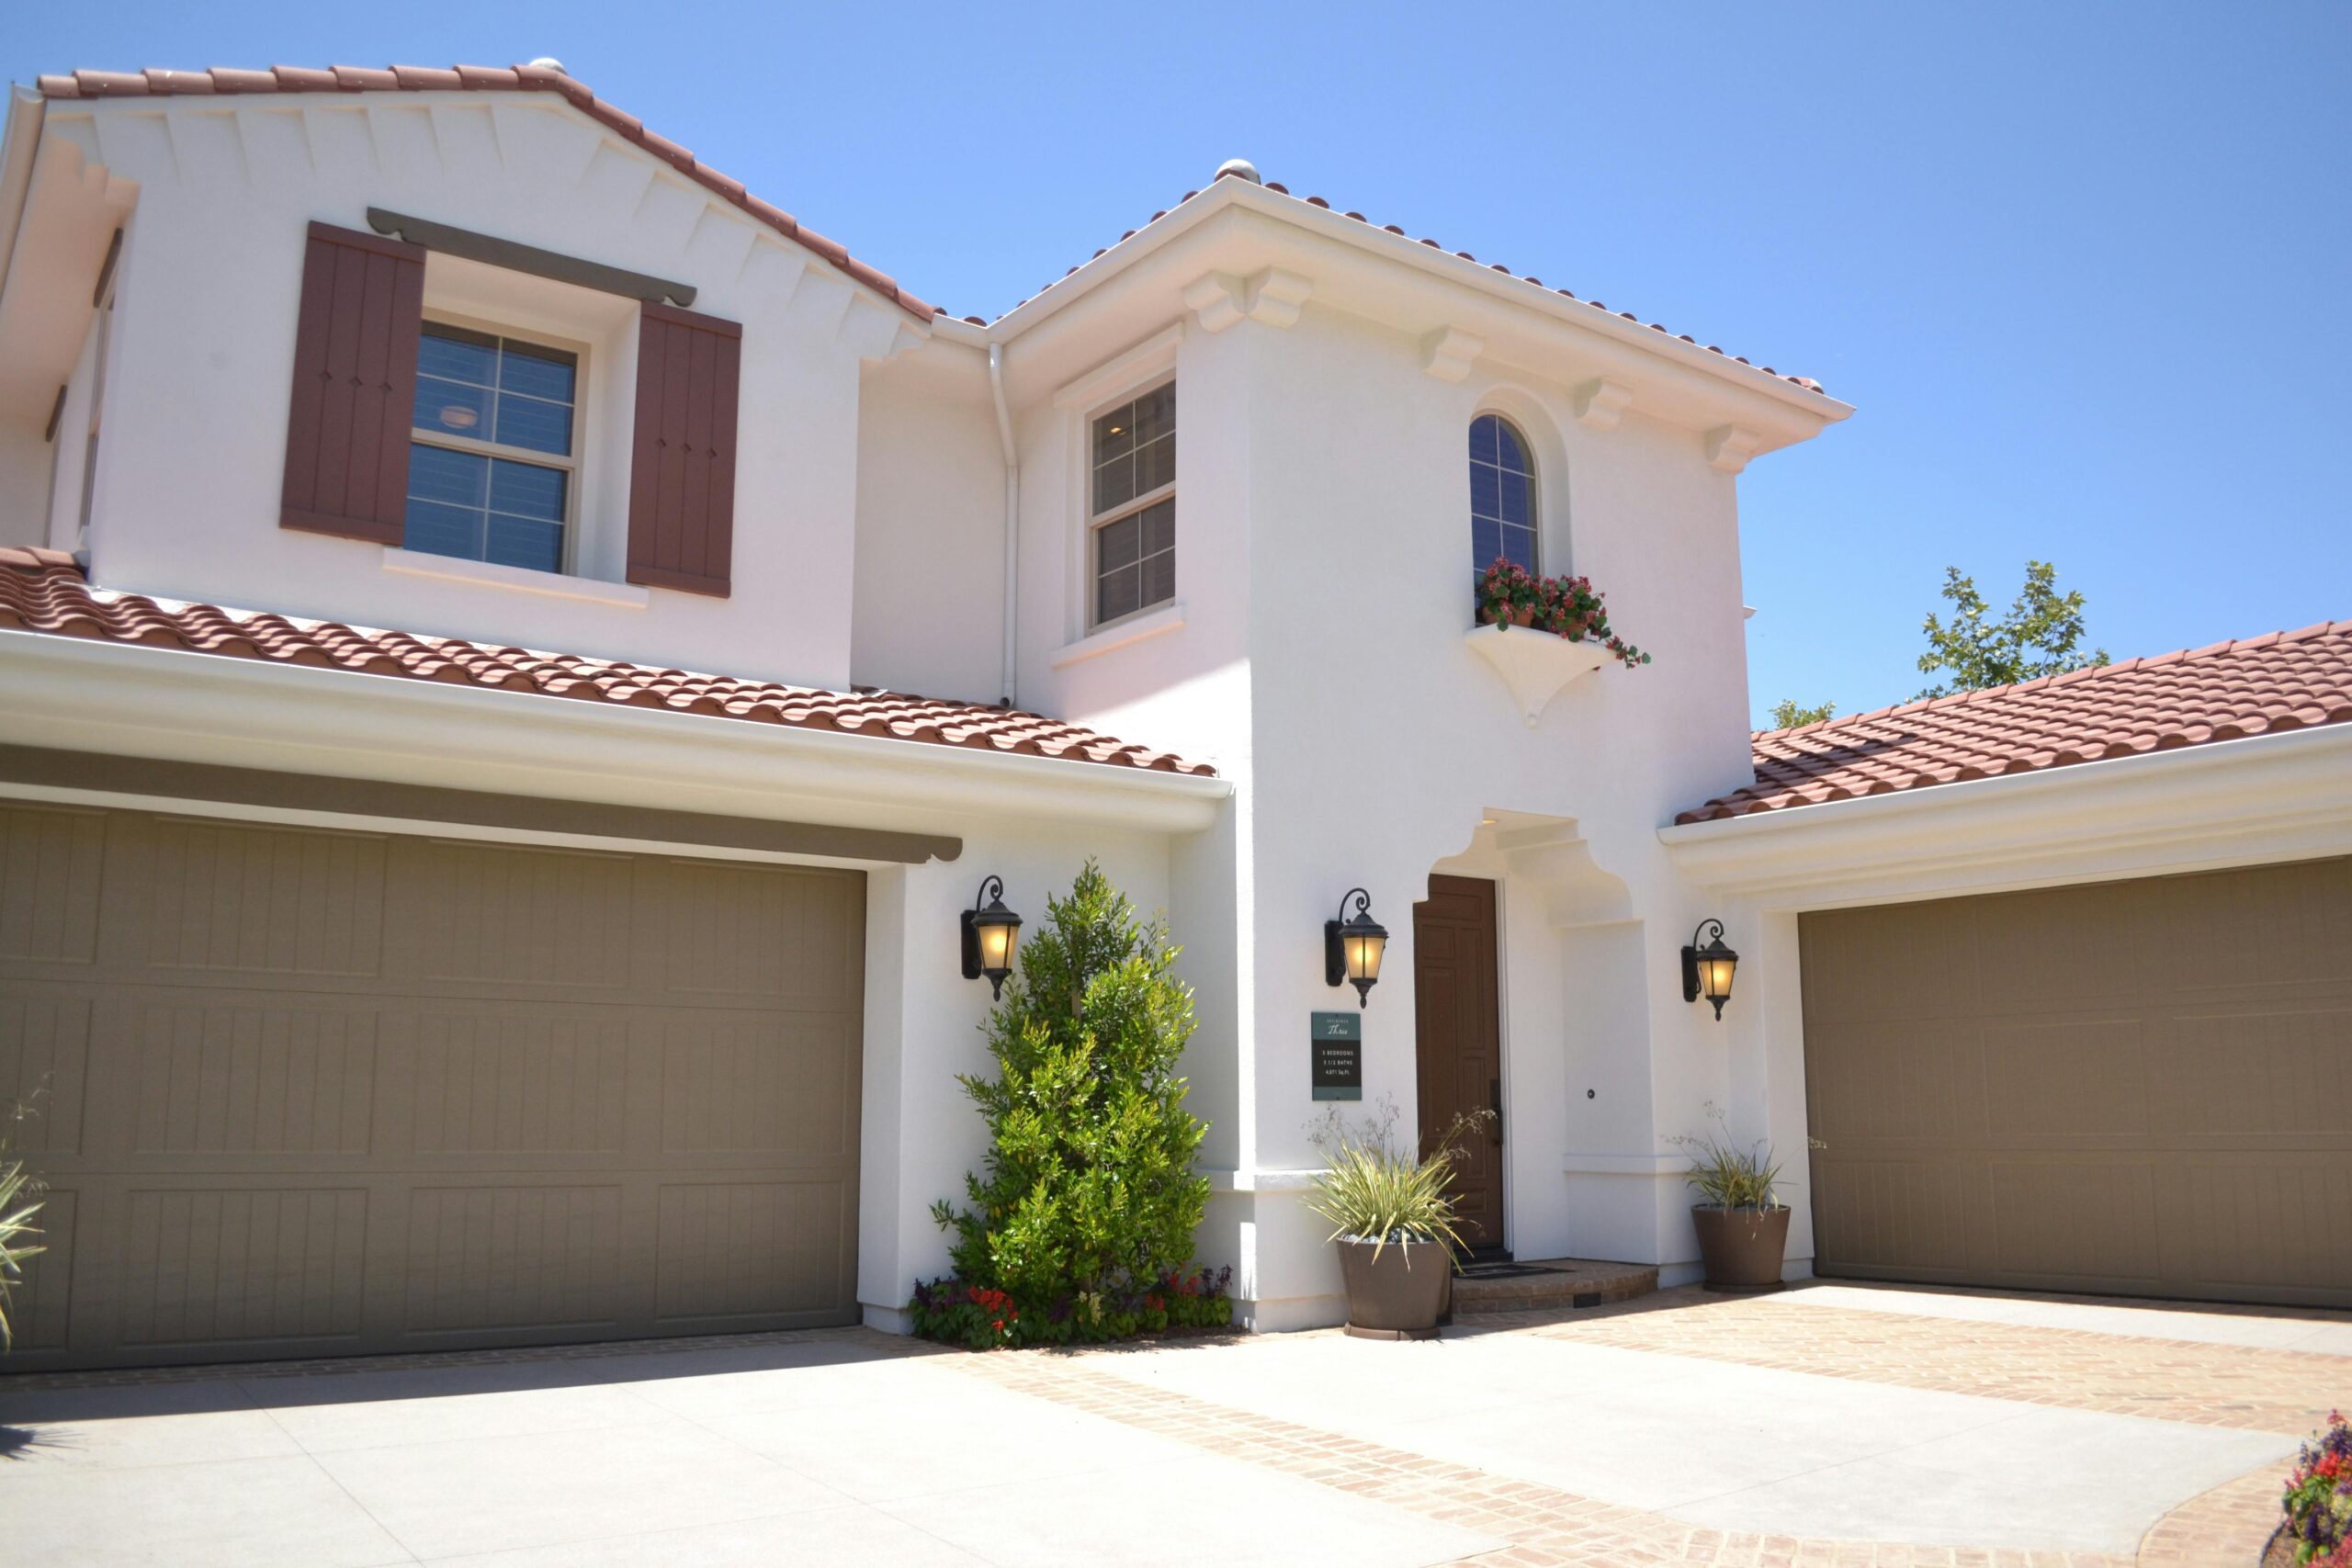 Does Converting a Garage Add Value to a Home in Tampa Bay, Florida? 
